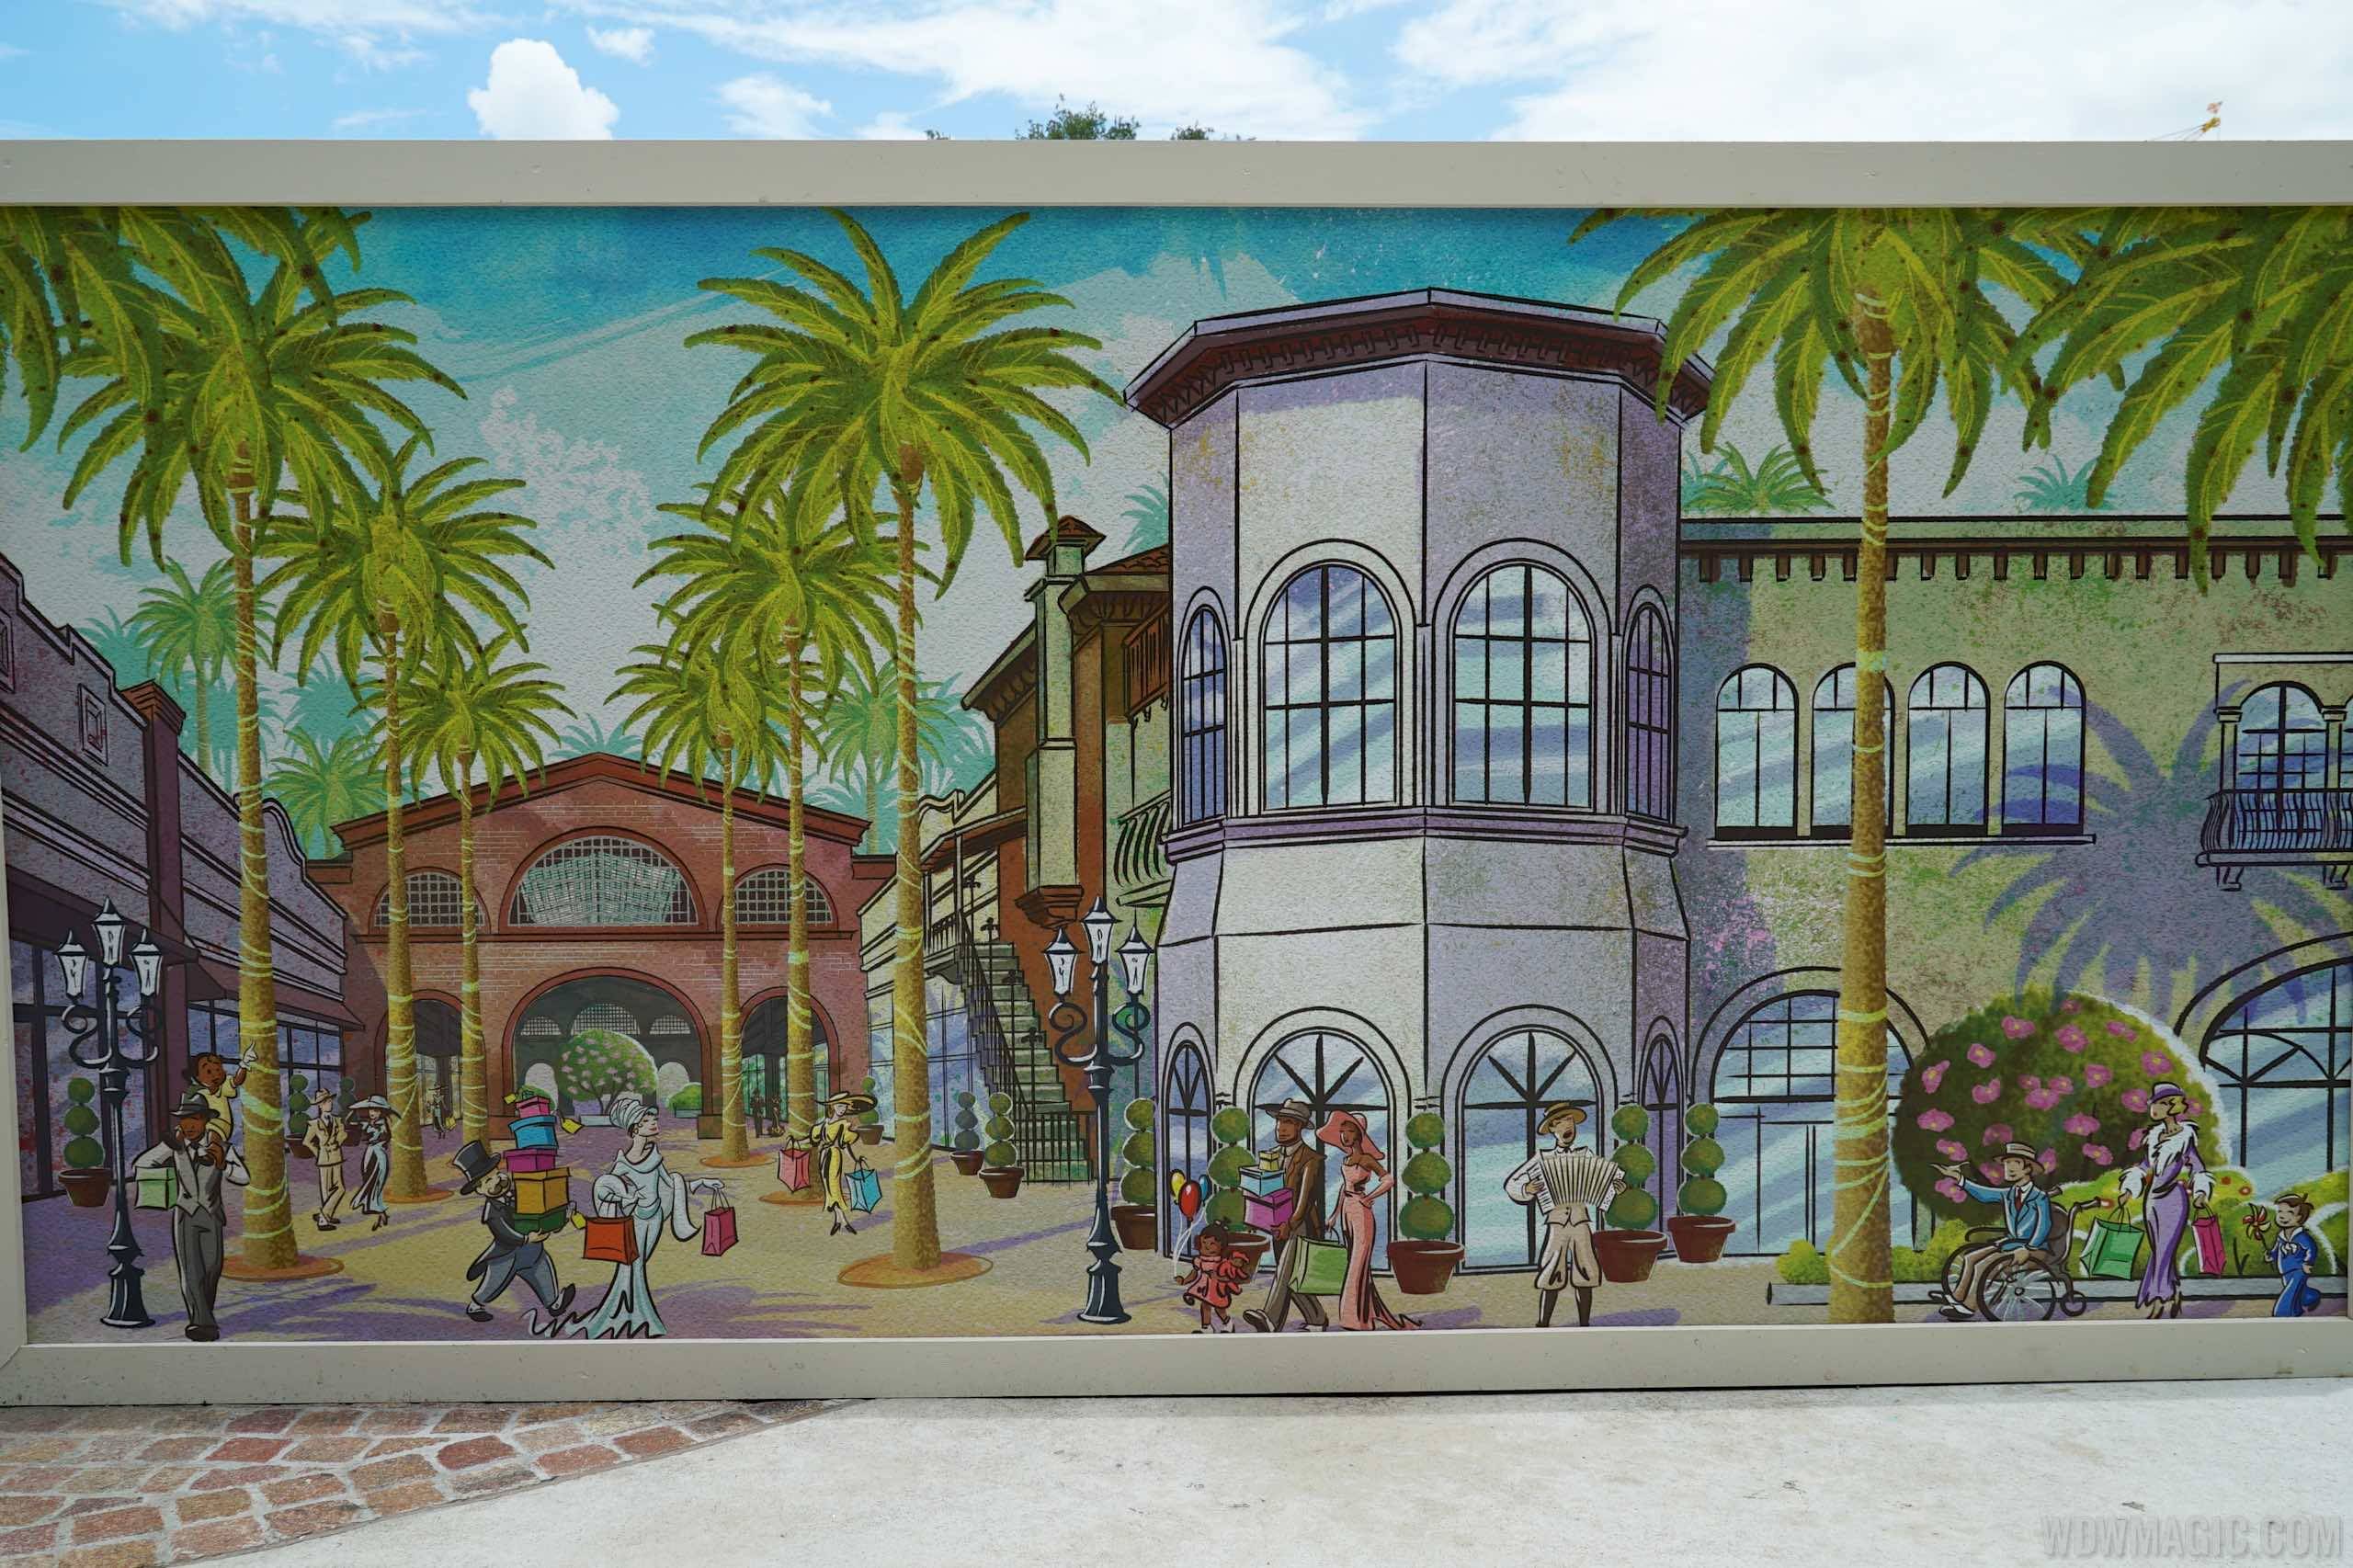 PHOTOS - New concept art gives a first look at what is coming next to Disney Springs